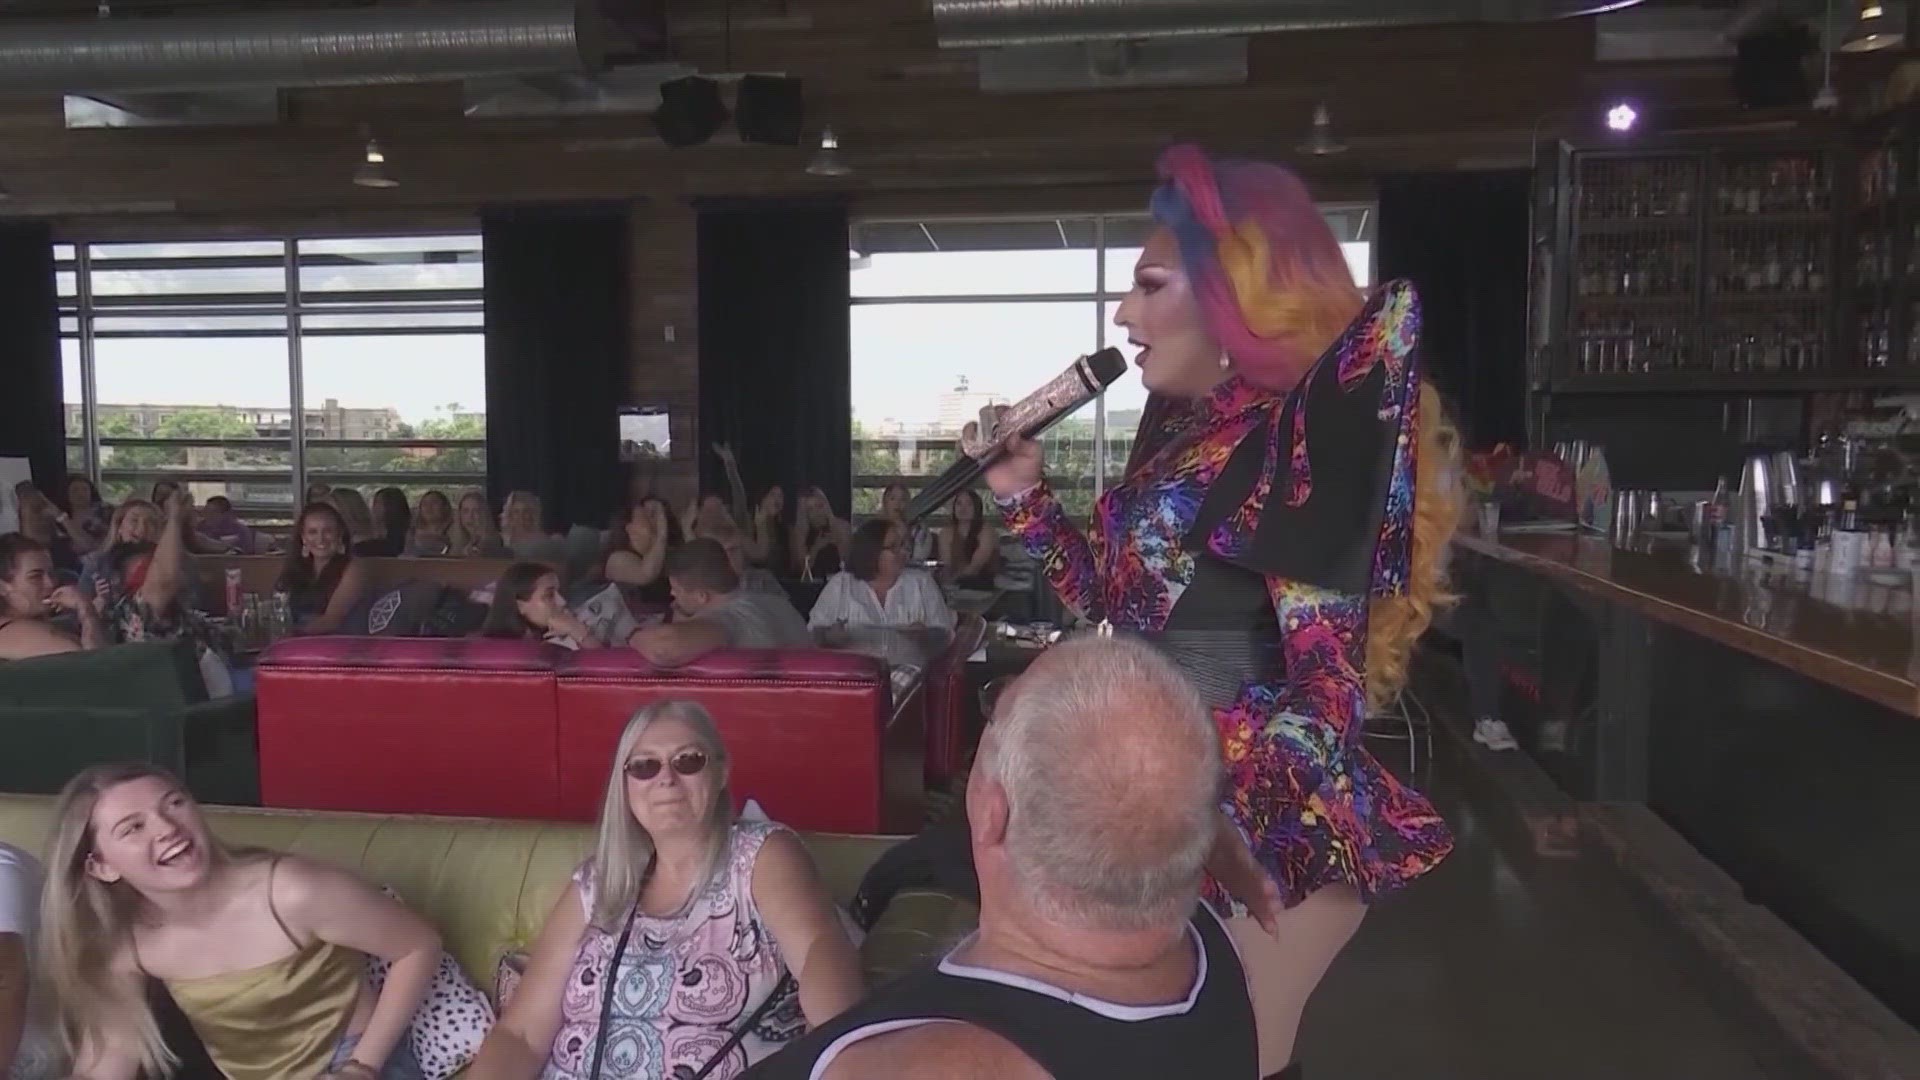 5 ways you could get in trouble under the Texas anti-drag show bill